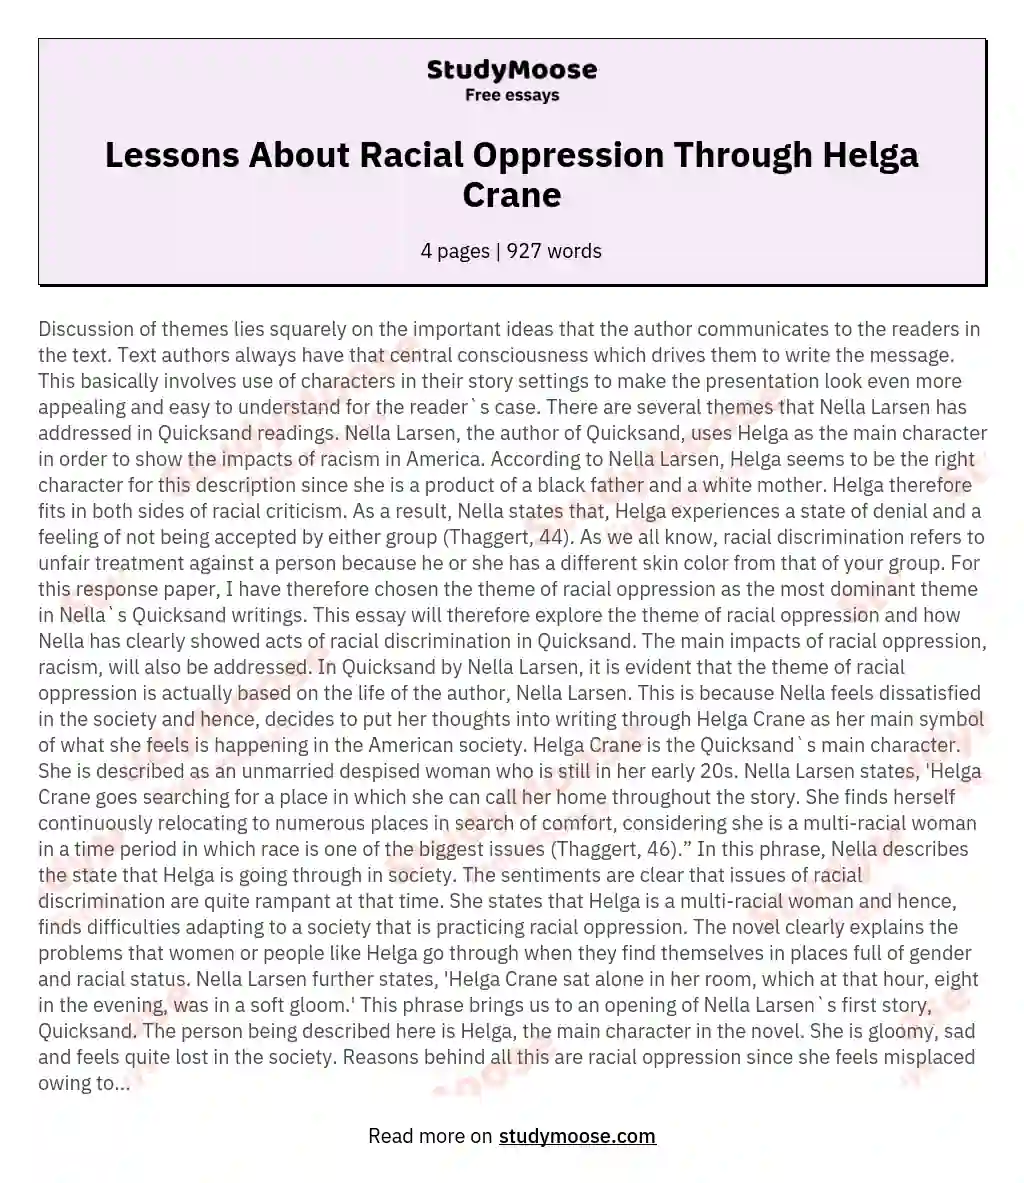 Lessons About Racial Oppression Through Helga Crane essay